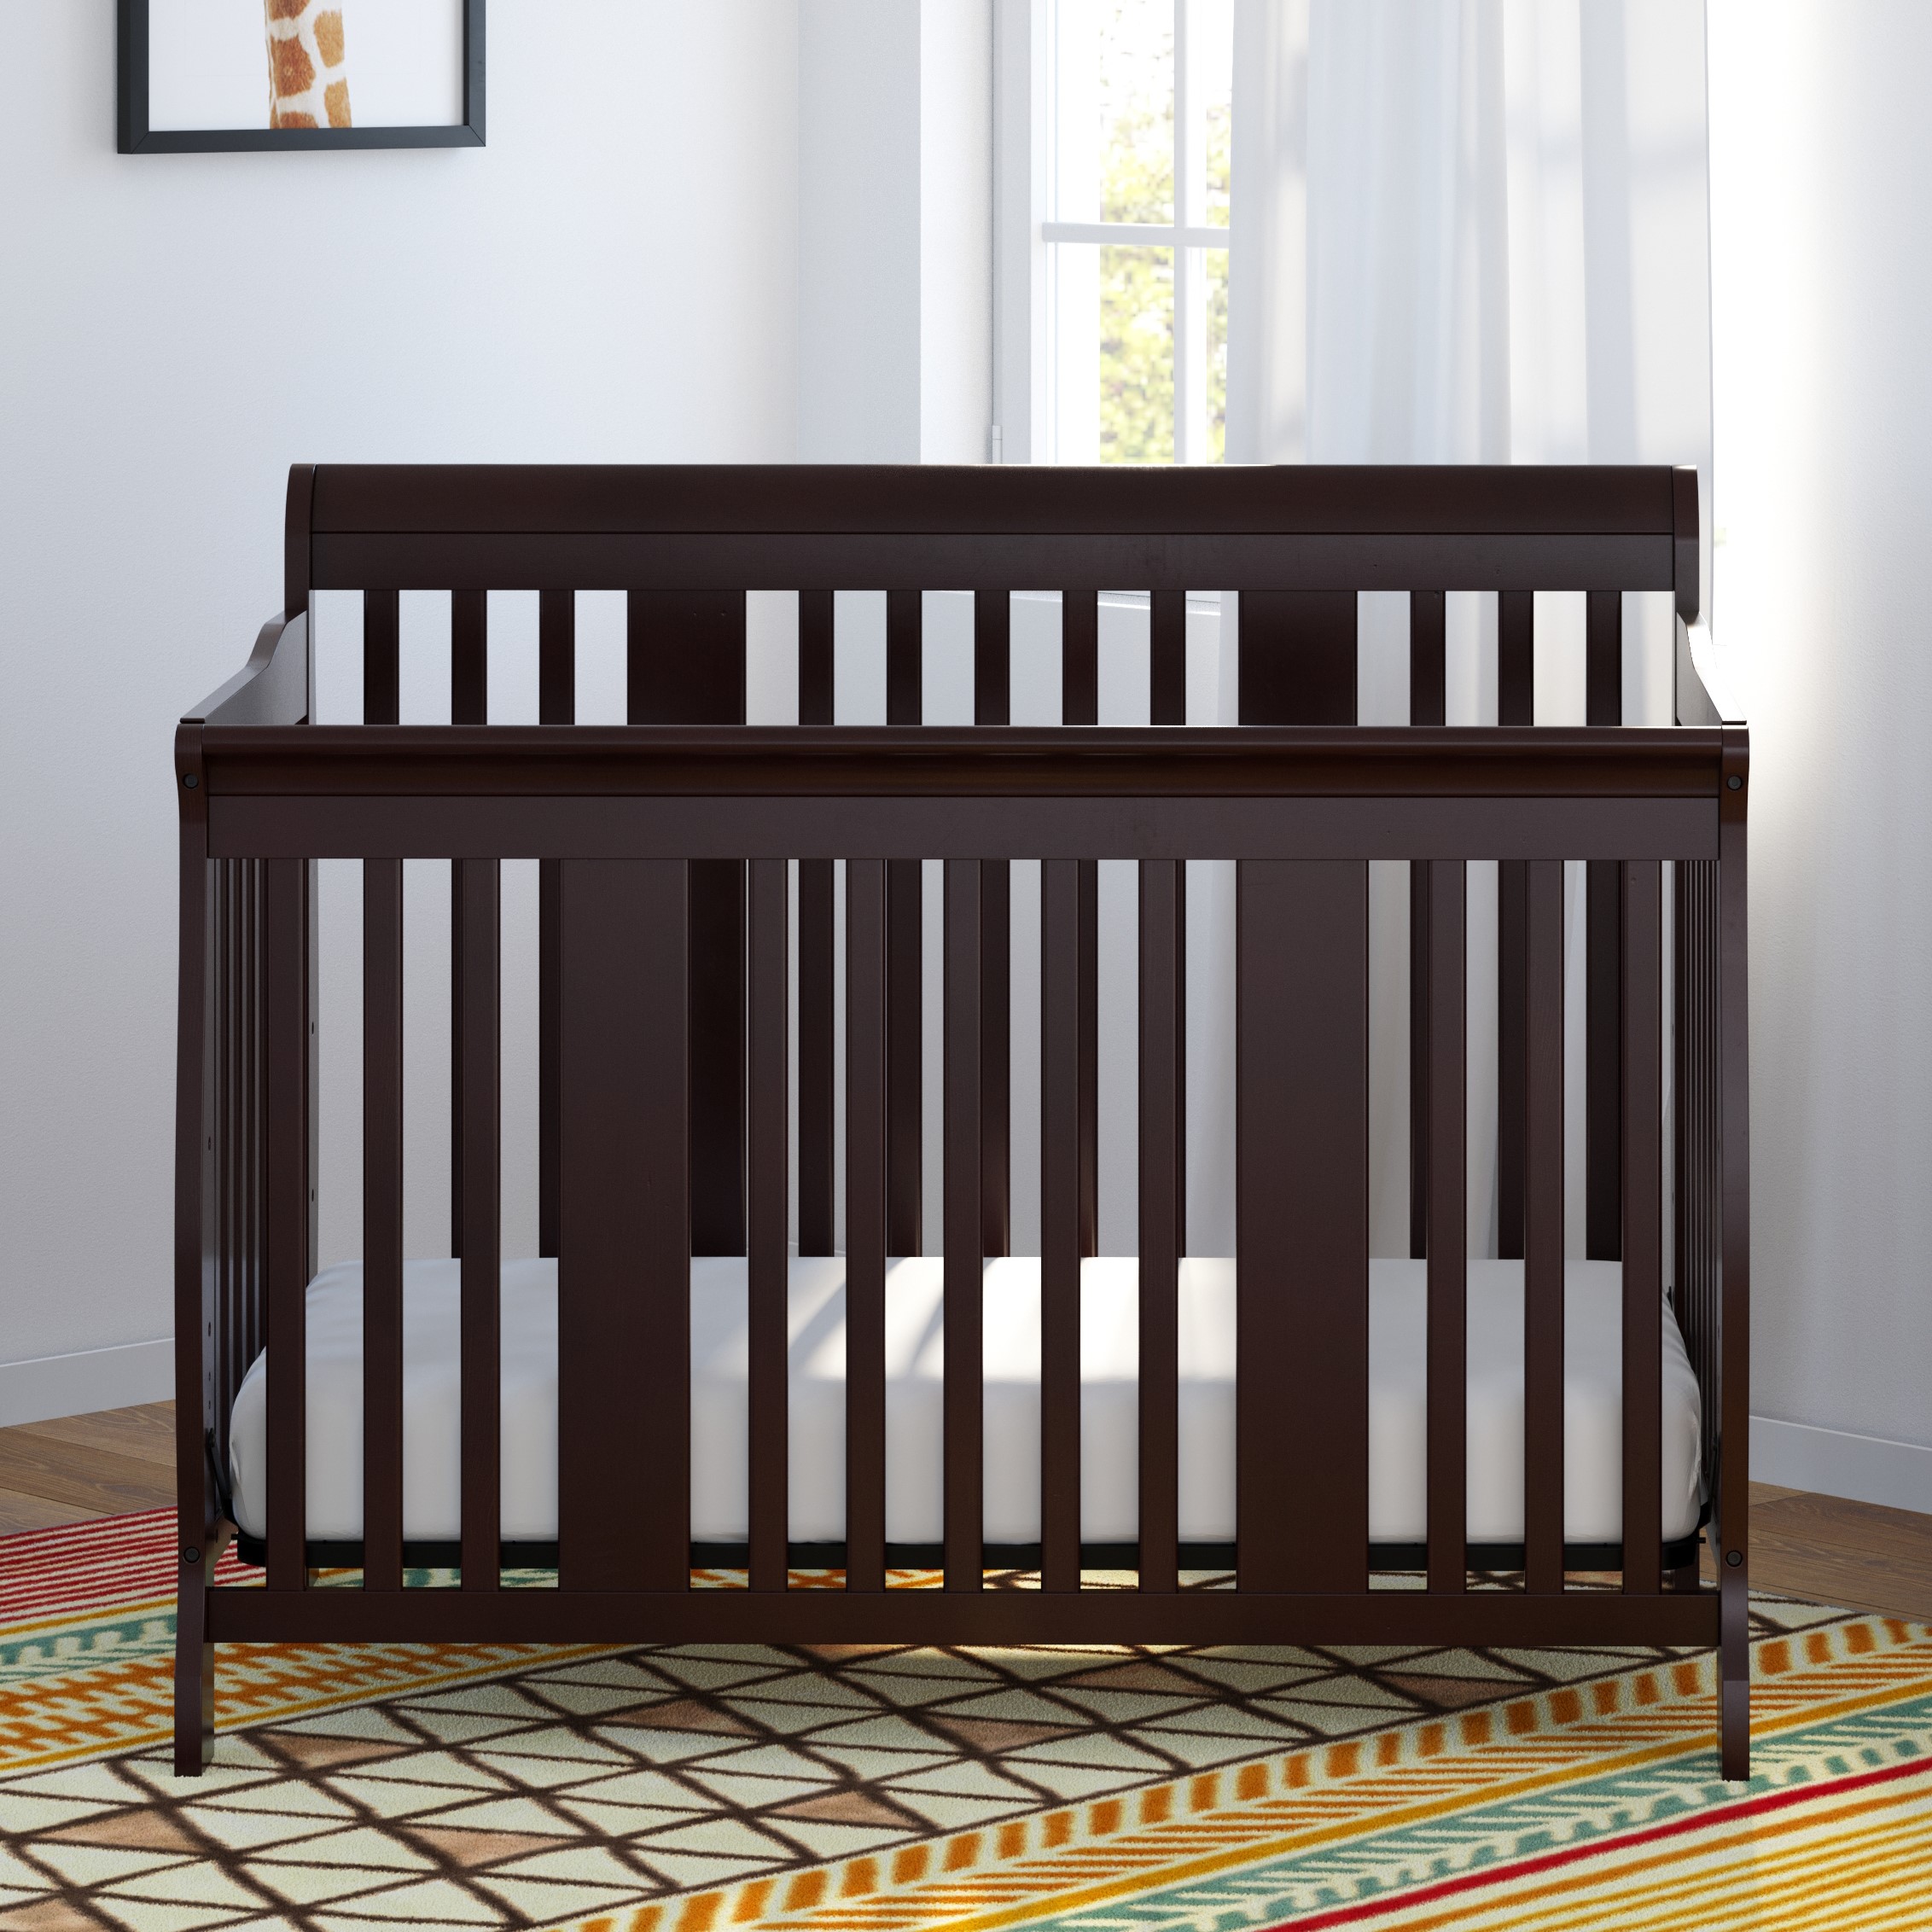 Storkcraft Tuscany 4-in-1 Convertible Baby Crib Espresso - image 2 of 9